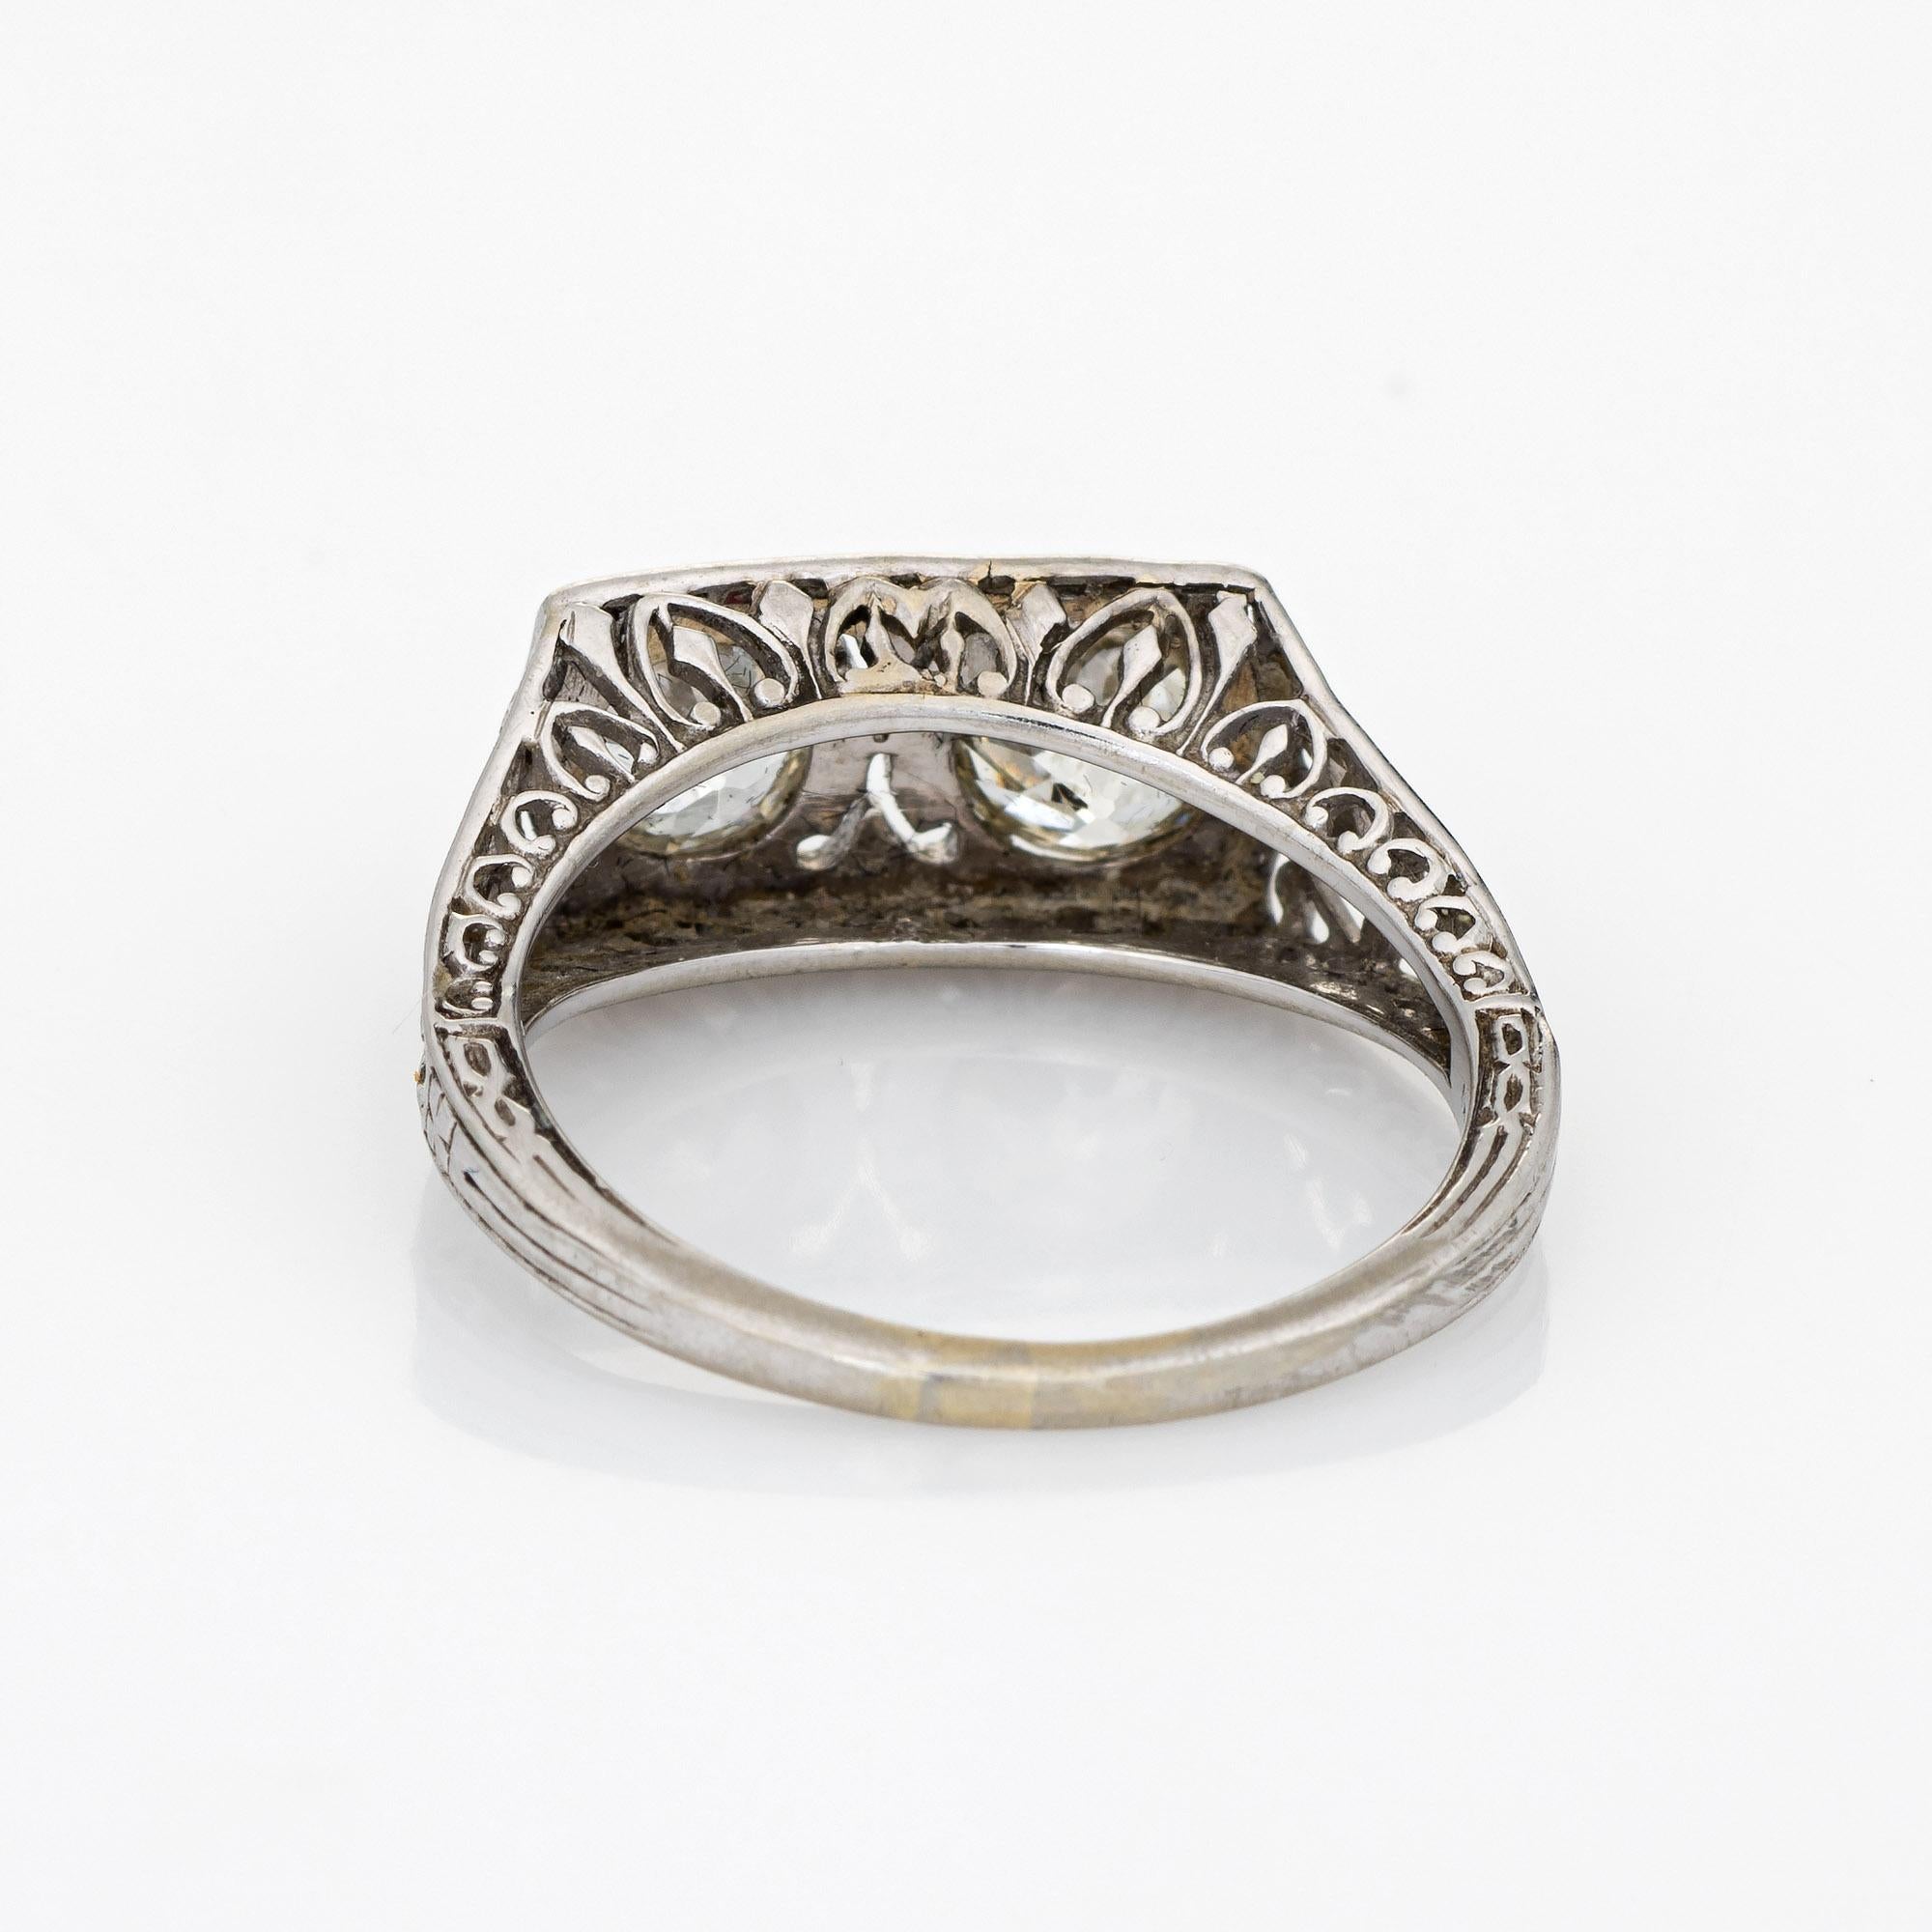 Vintage Art Deco Ring 1.25ct Double Diamond 18k White Gold Filigree Sz 6 Jewelry In Good Condition For Sale In Torrance, CA